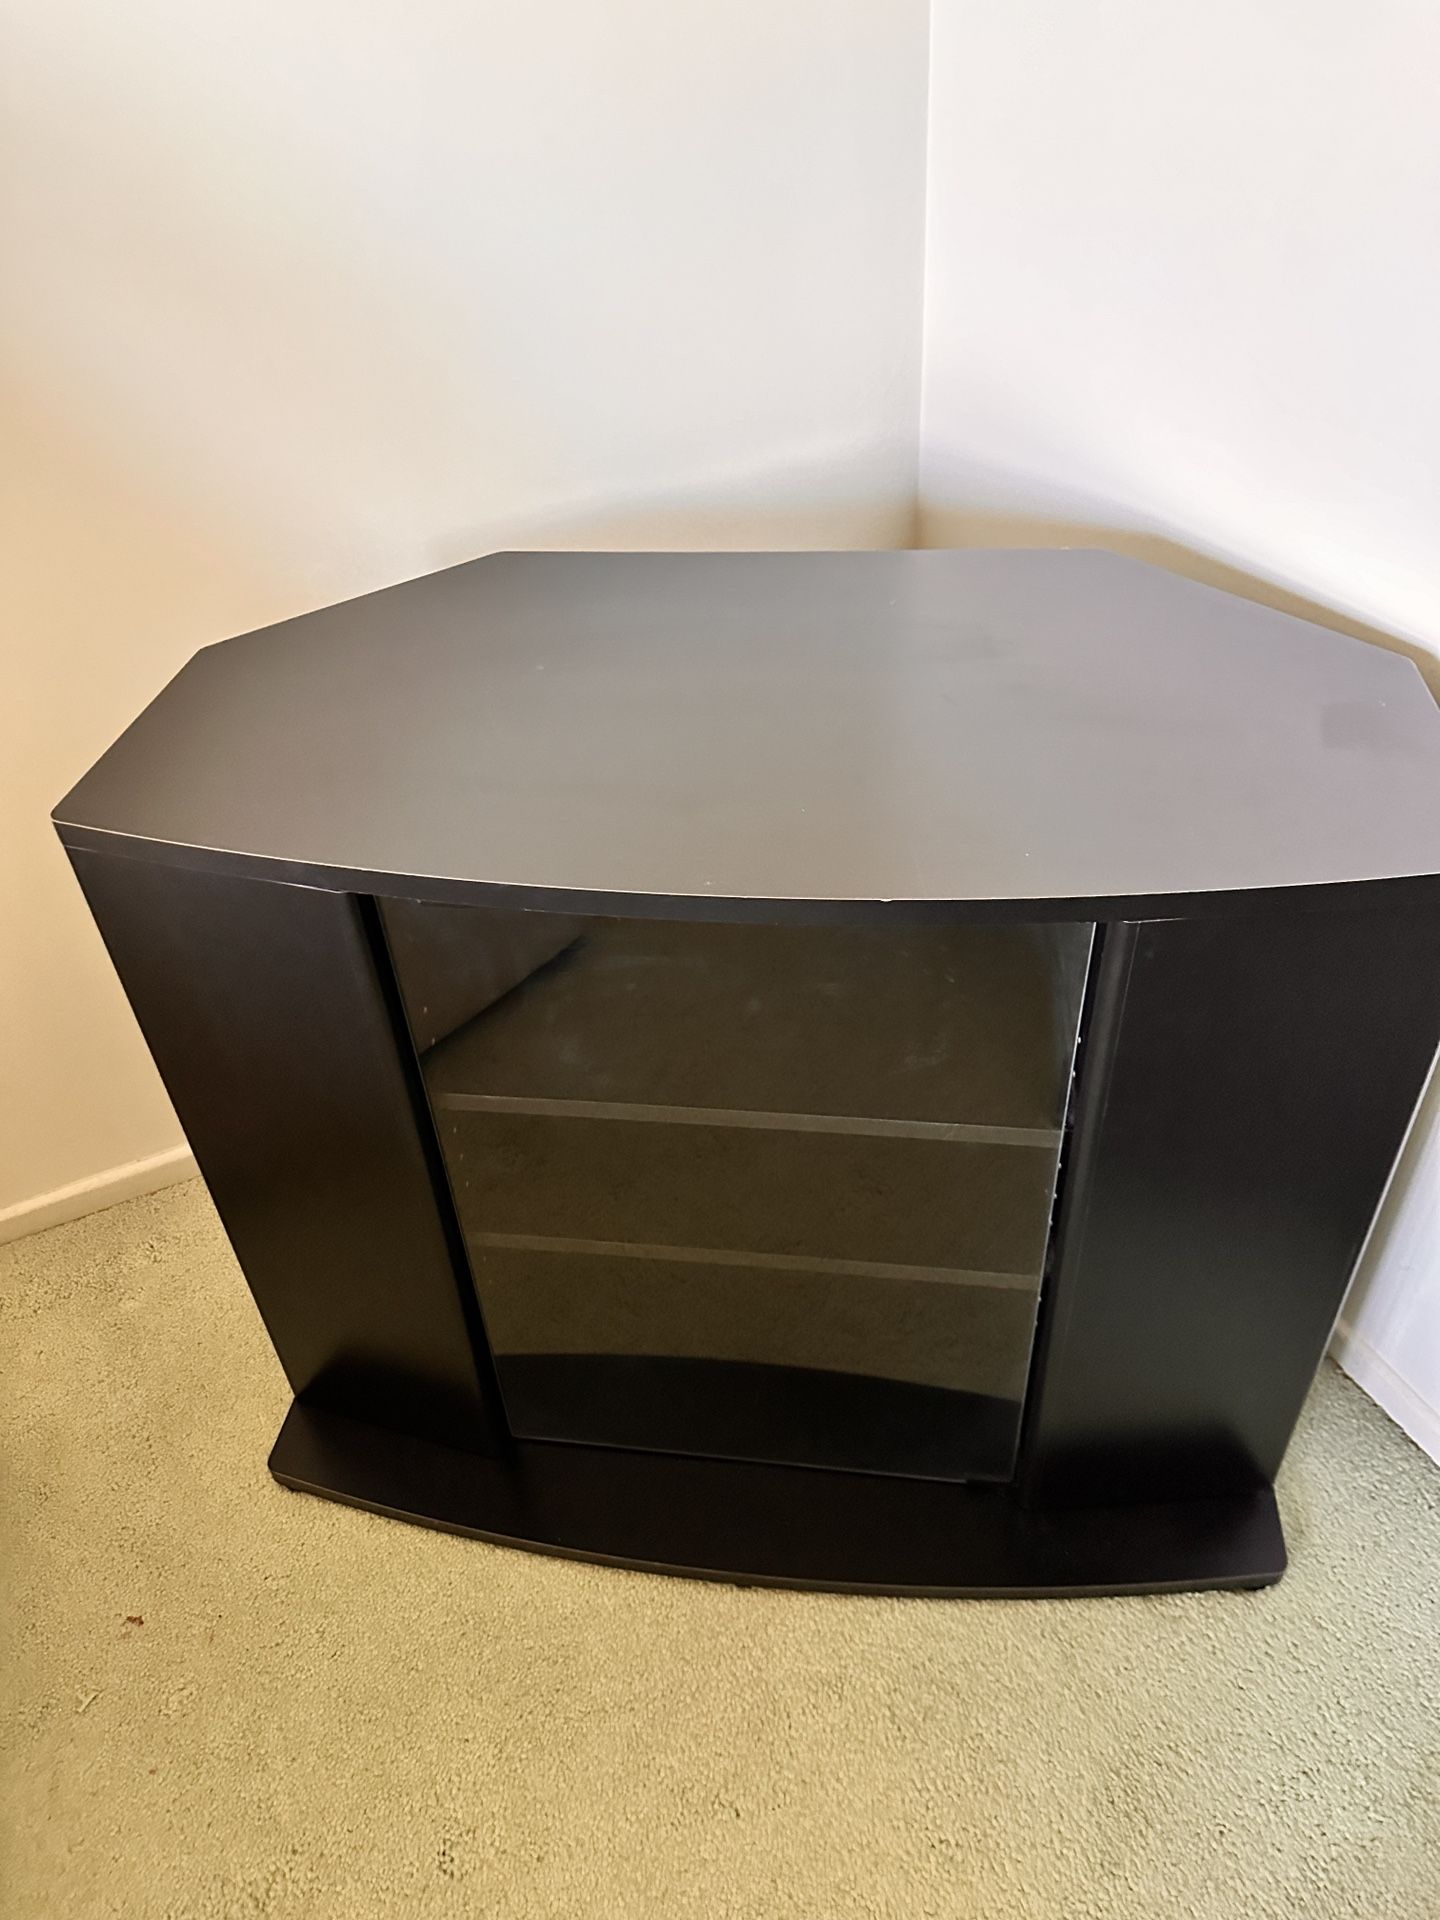 Must Sell ASAP!! Like New! TV Entertainment Stand, Corner Nook, Great For Small Spaces — With Storage Shelving — Color: Black